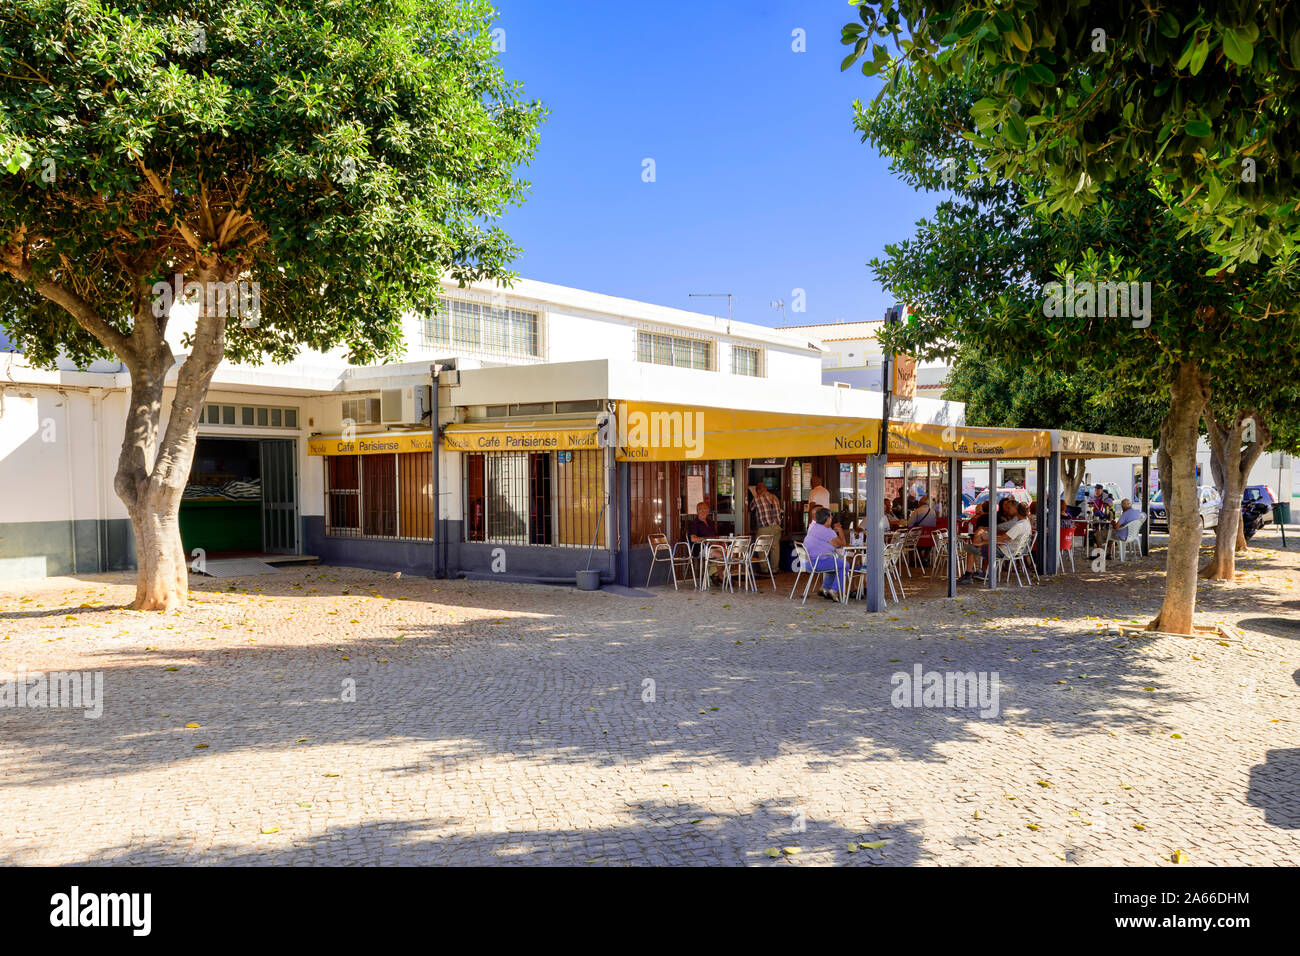 Moncarapacho locals local people relaxing at Nicola a street bar café restaurant. Moncarapacho Algarve, Portugal. Stock Photo